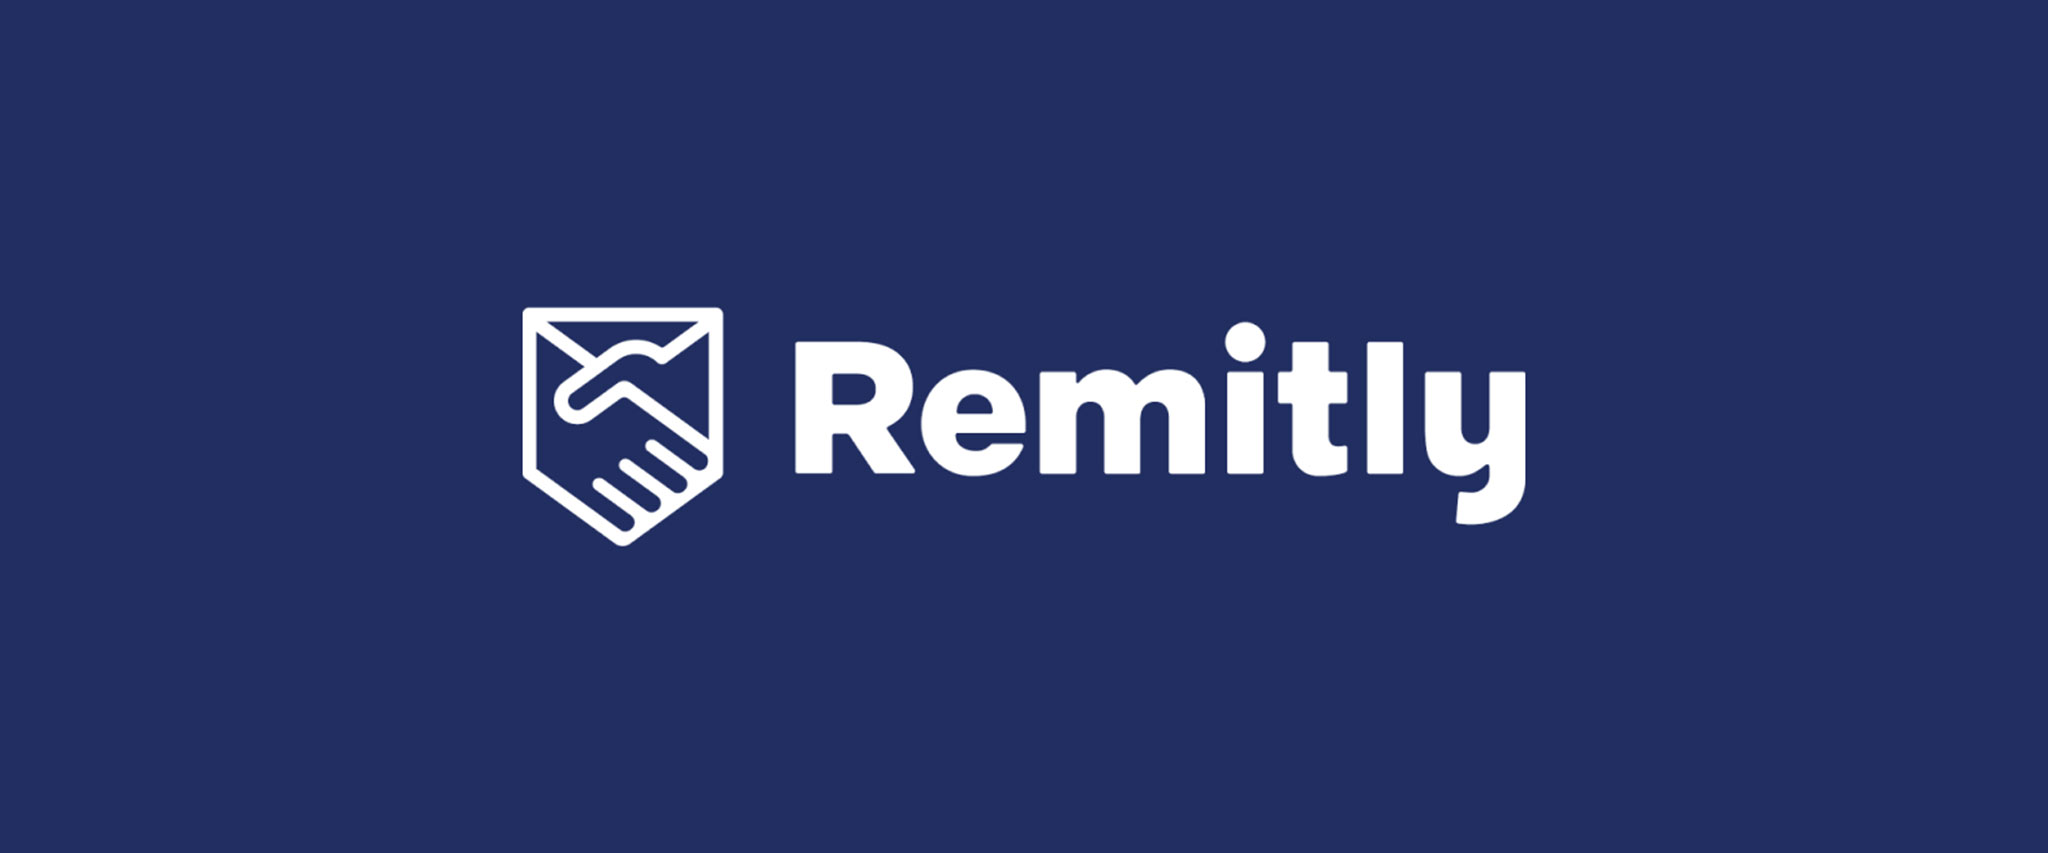 7-facts-about-remitly